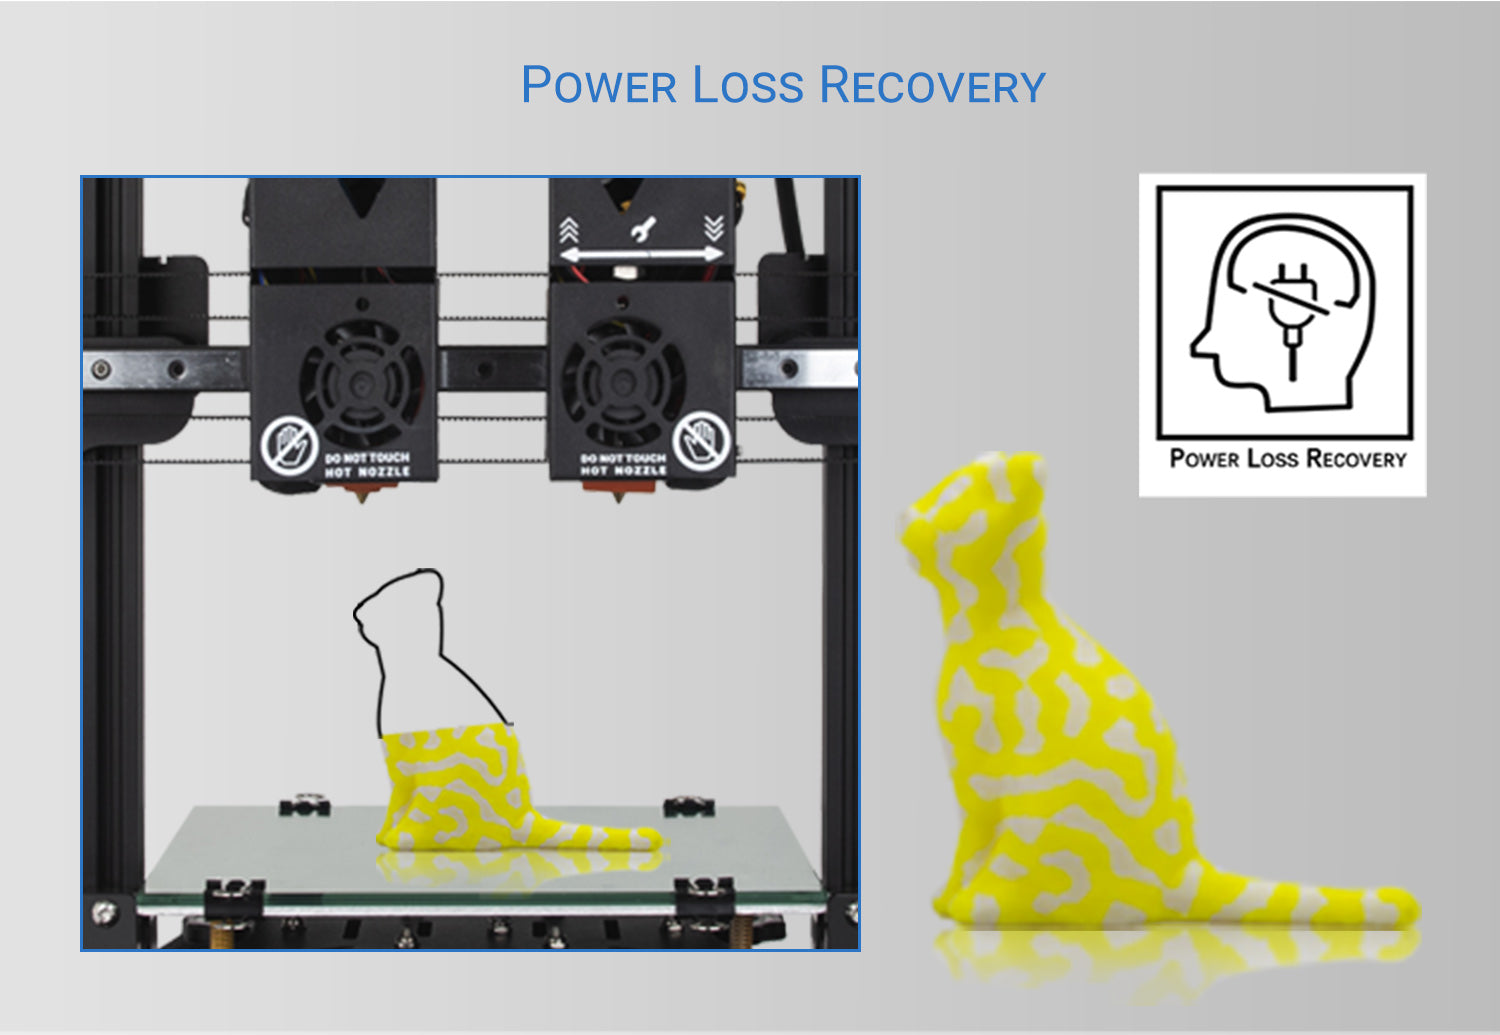 TL-D5 Power Loss Recovery